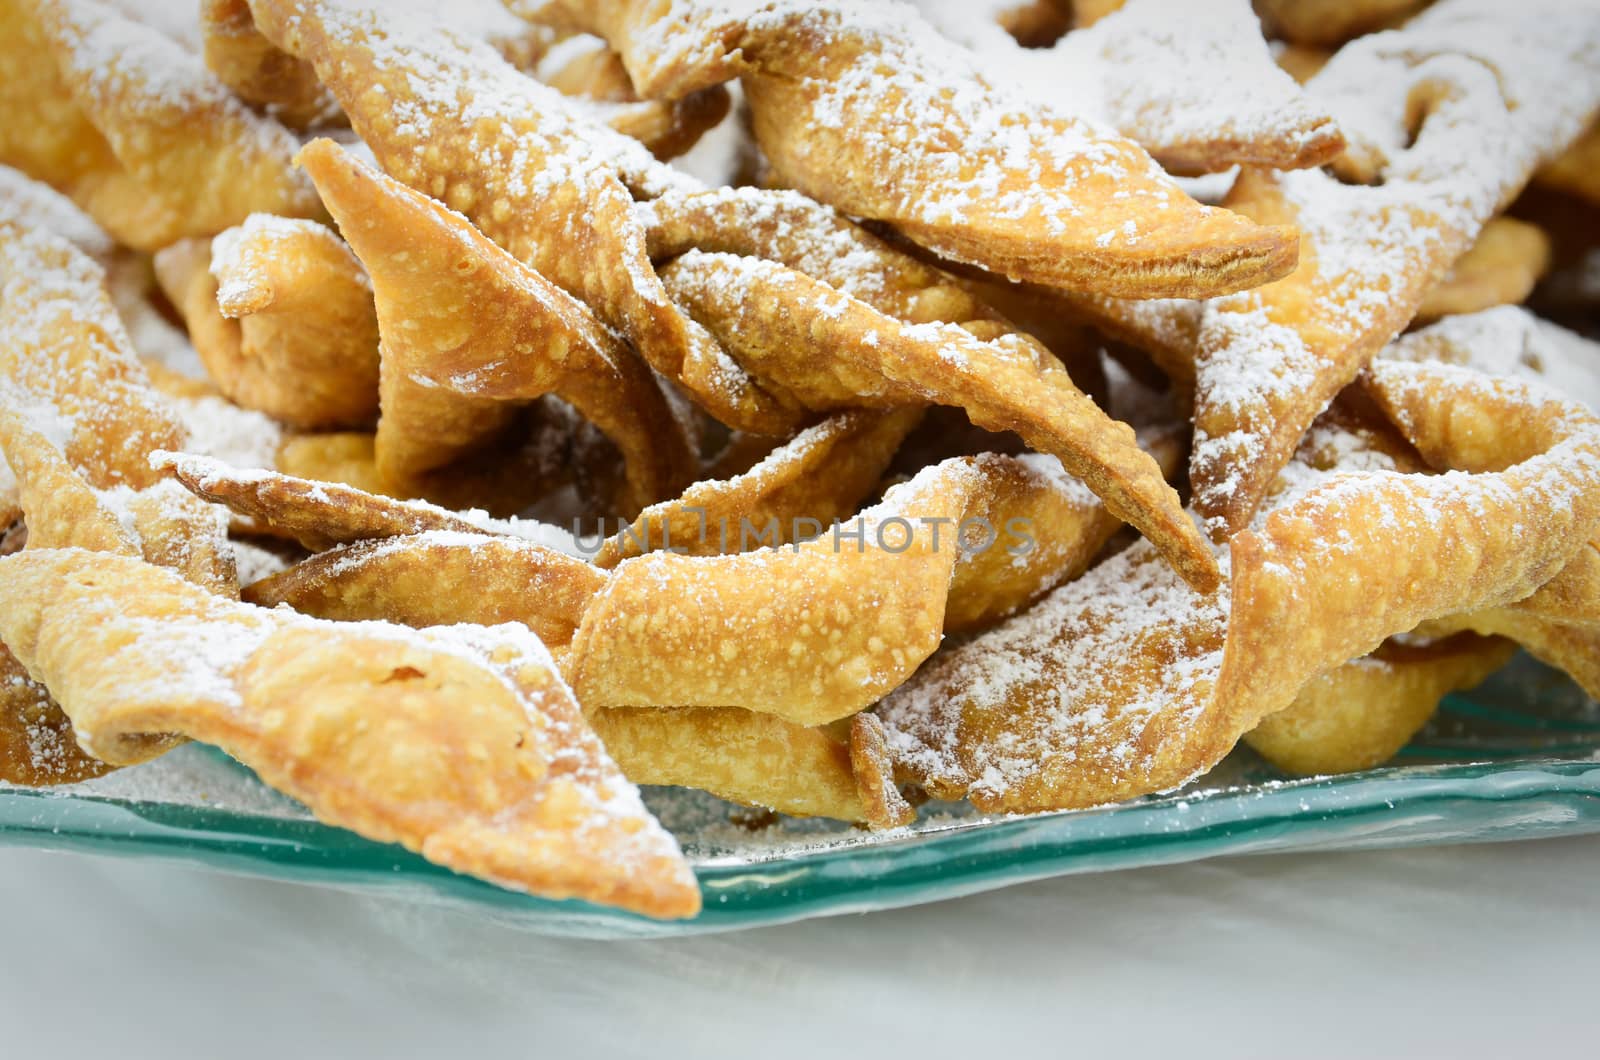 Chrust (faworek) funnel cake - Polish fried cookie (a kind of cracknels) with powdered sugar.
